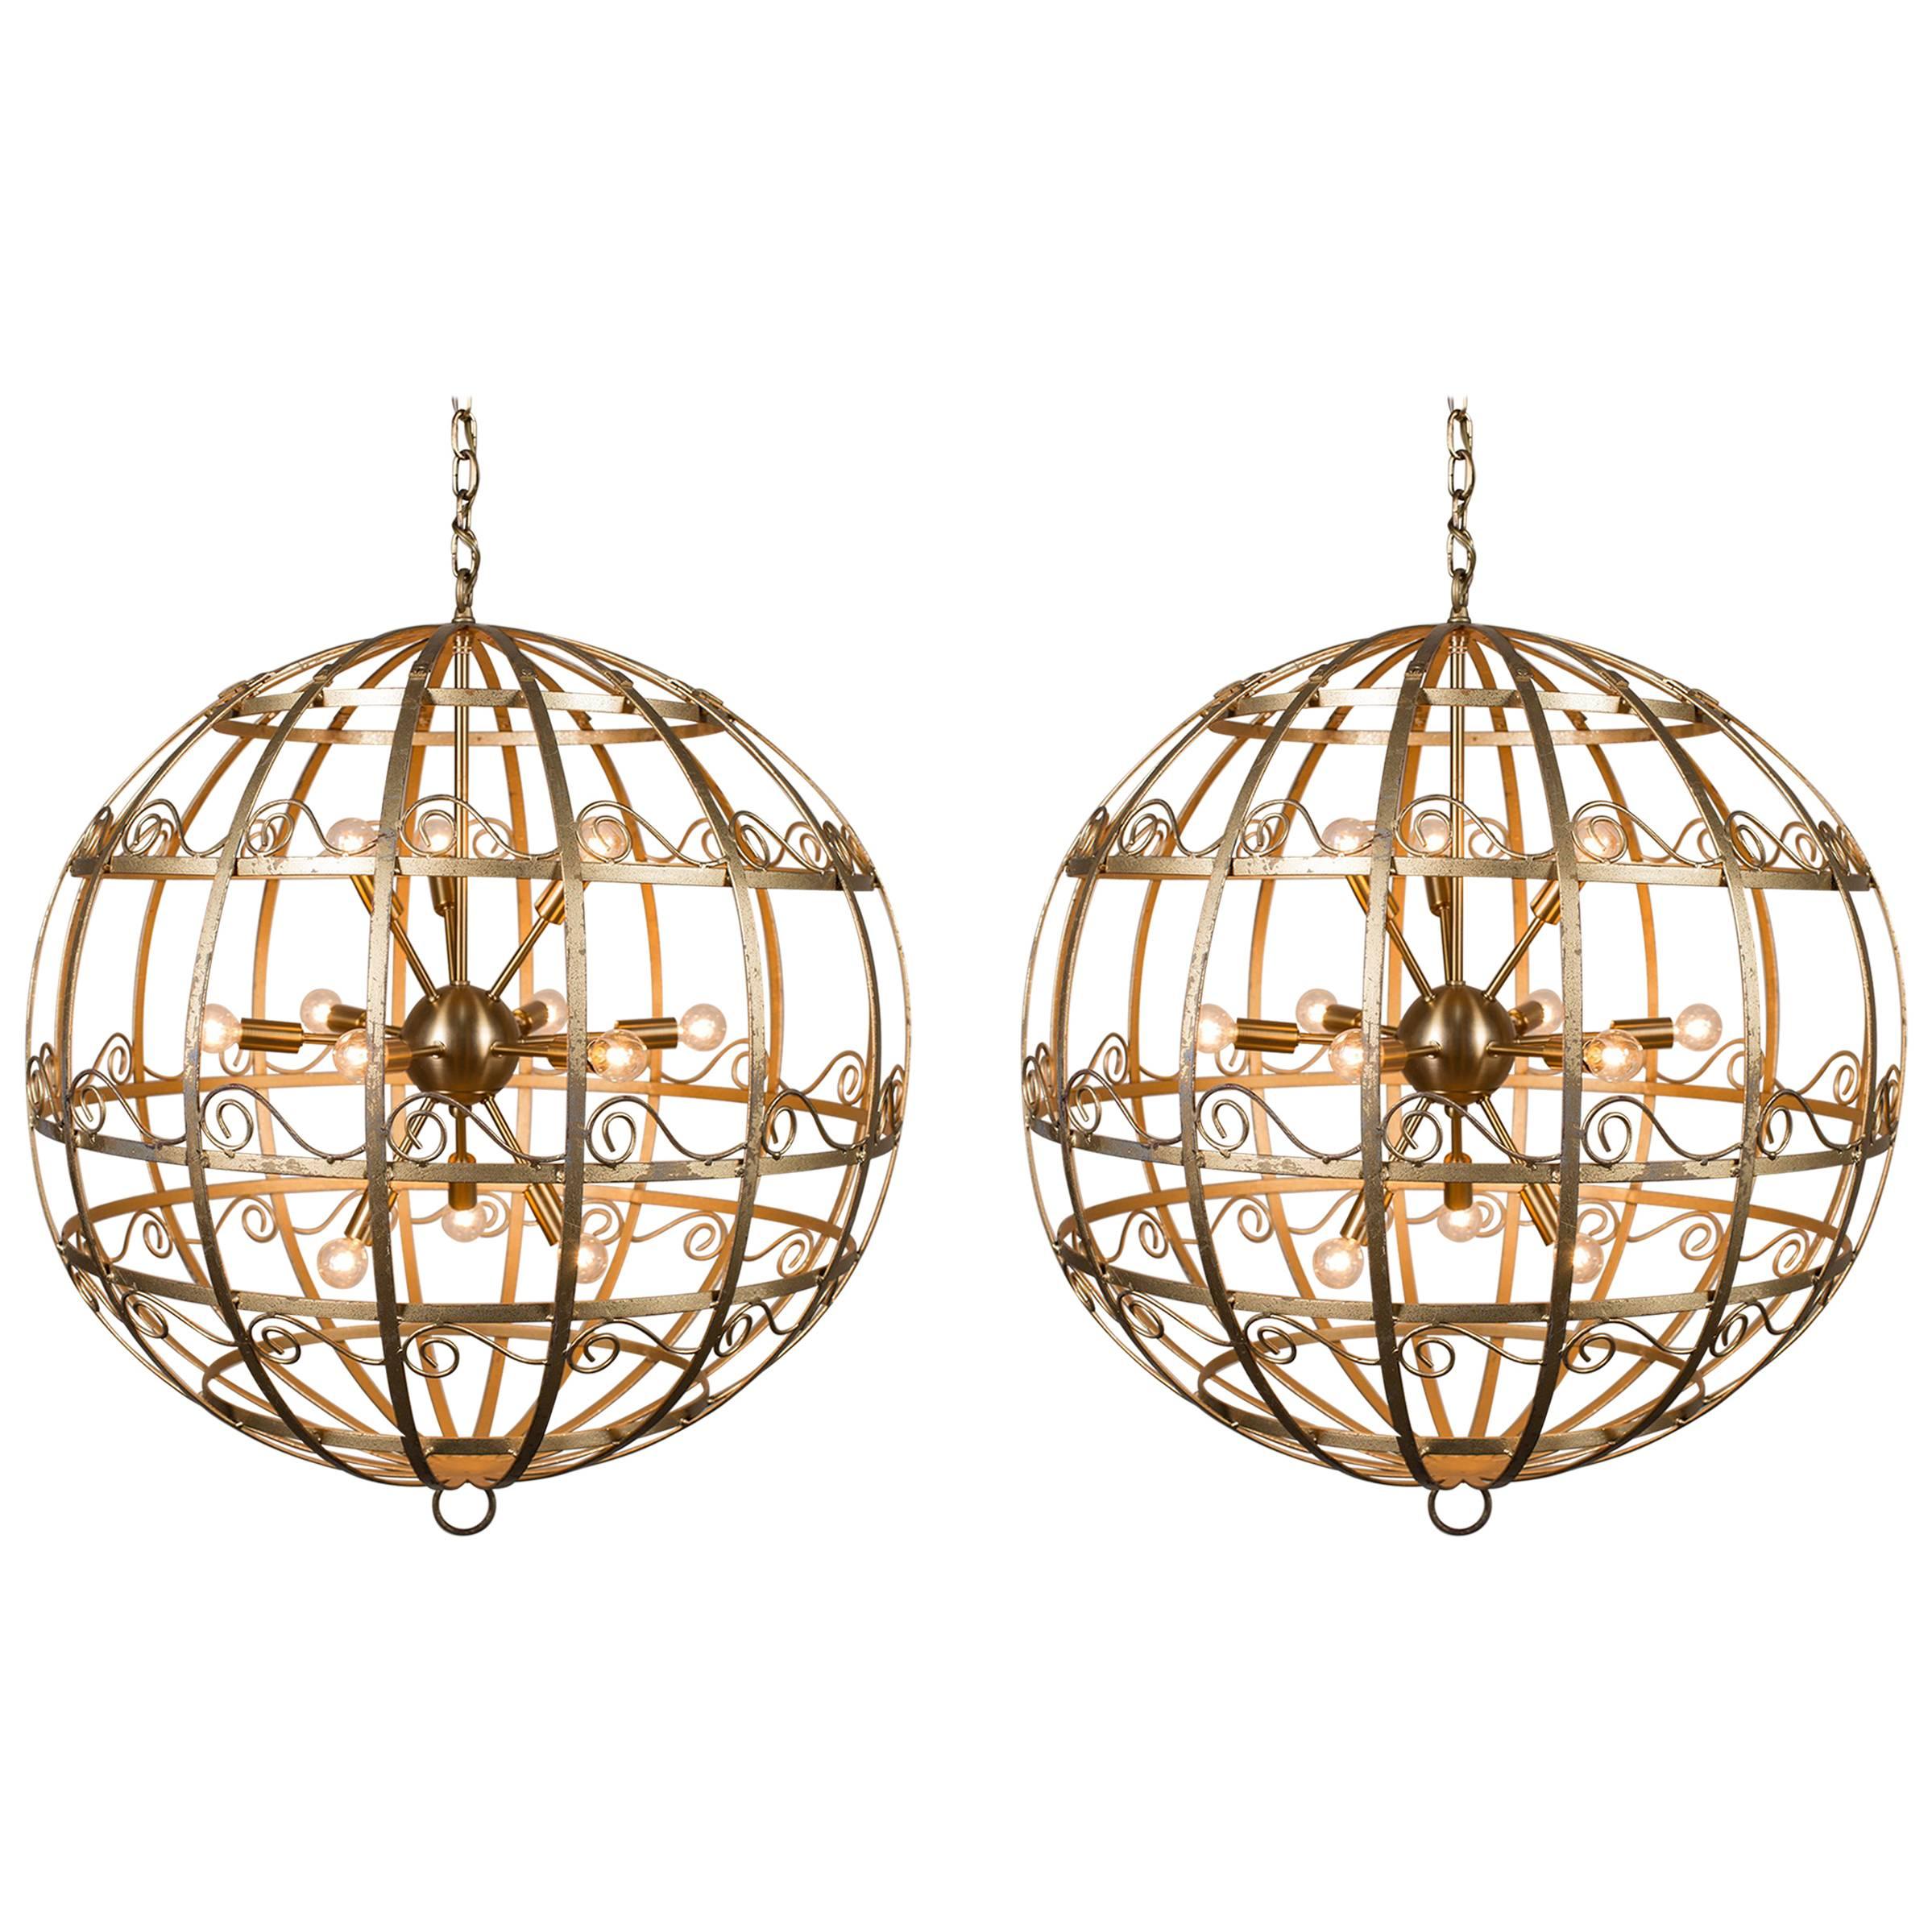 Pair of Vintage French Gold Metal Fixtures with Sputnik Lights, circa 1950